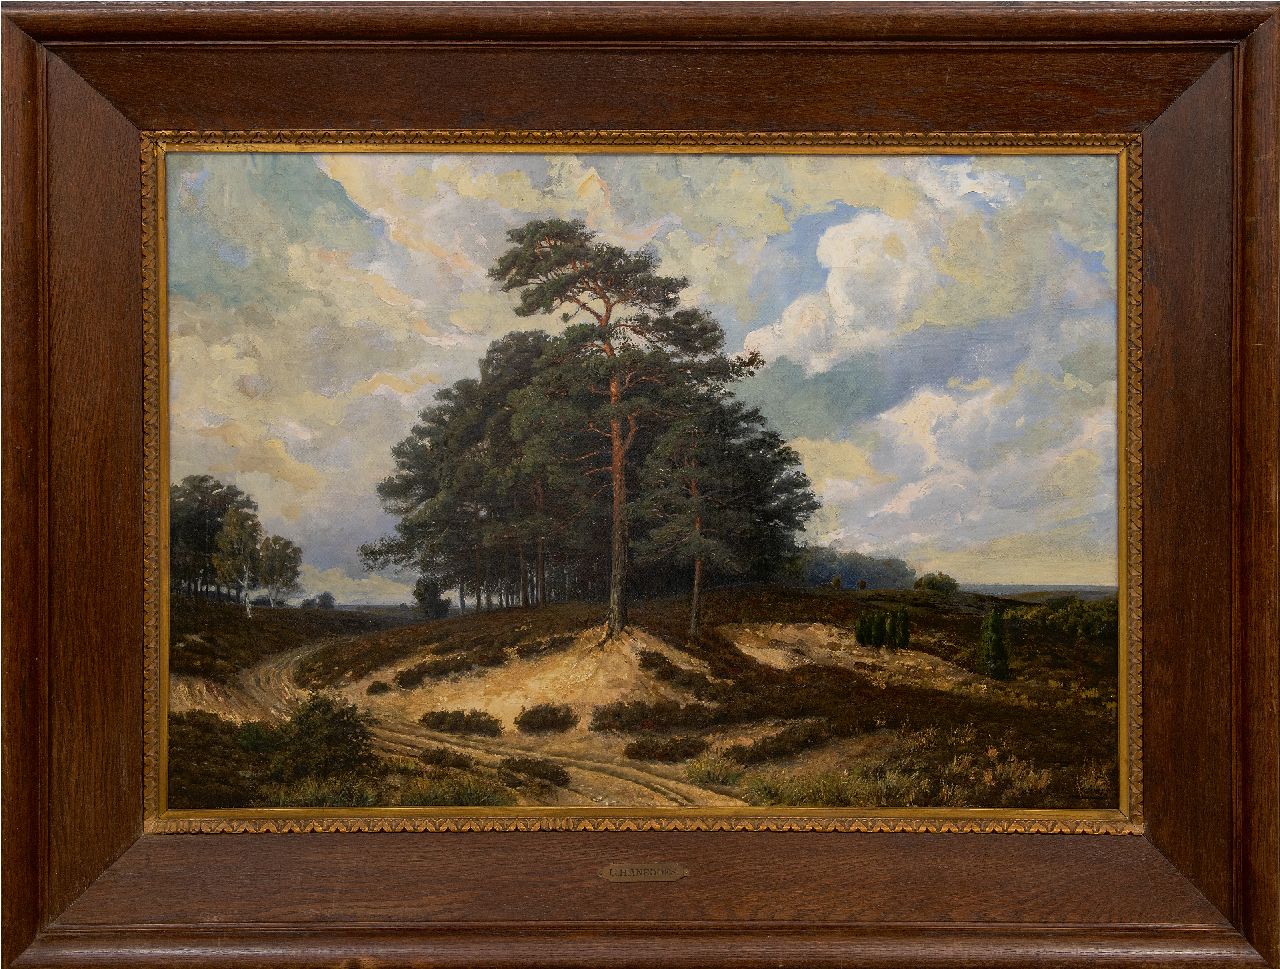 Hanedoes G.  | Gabriël Hanedoes | Paintings offered for sale | Heathlandscape, oil on canvas 67.5 x 95.7 cm, signed l.r.